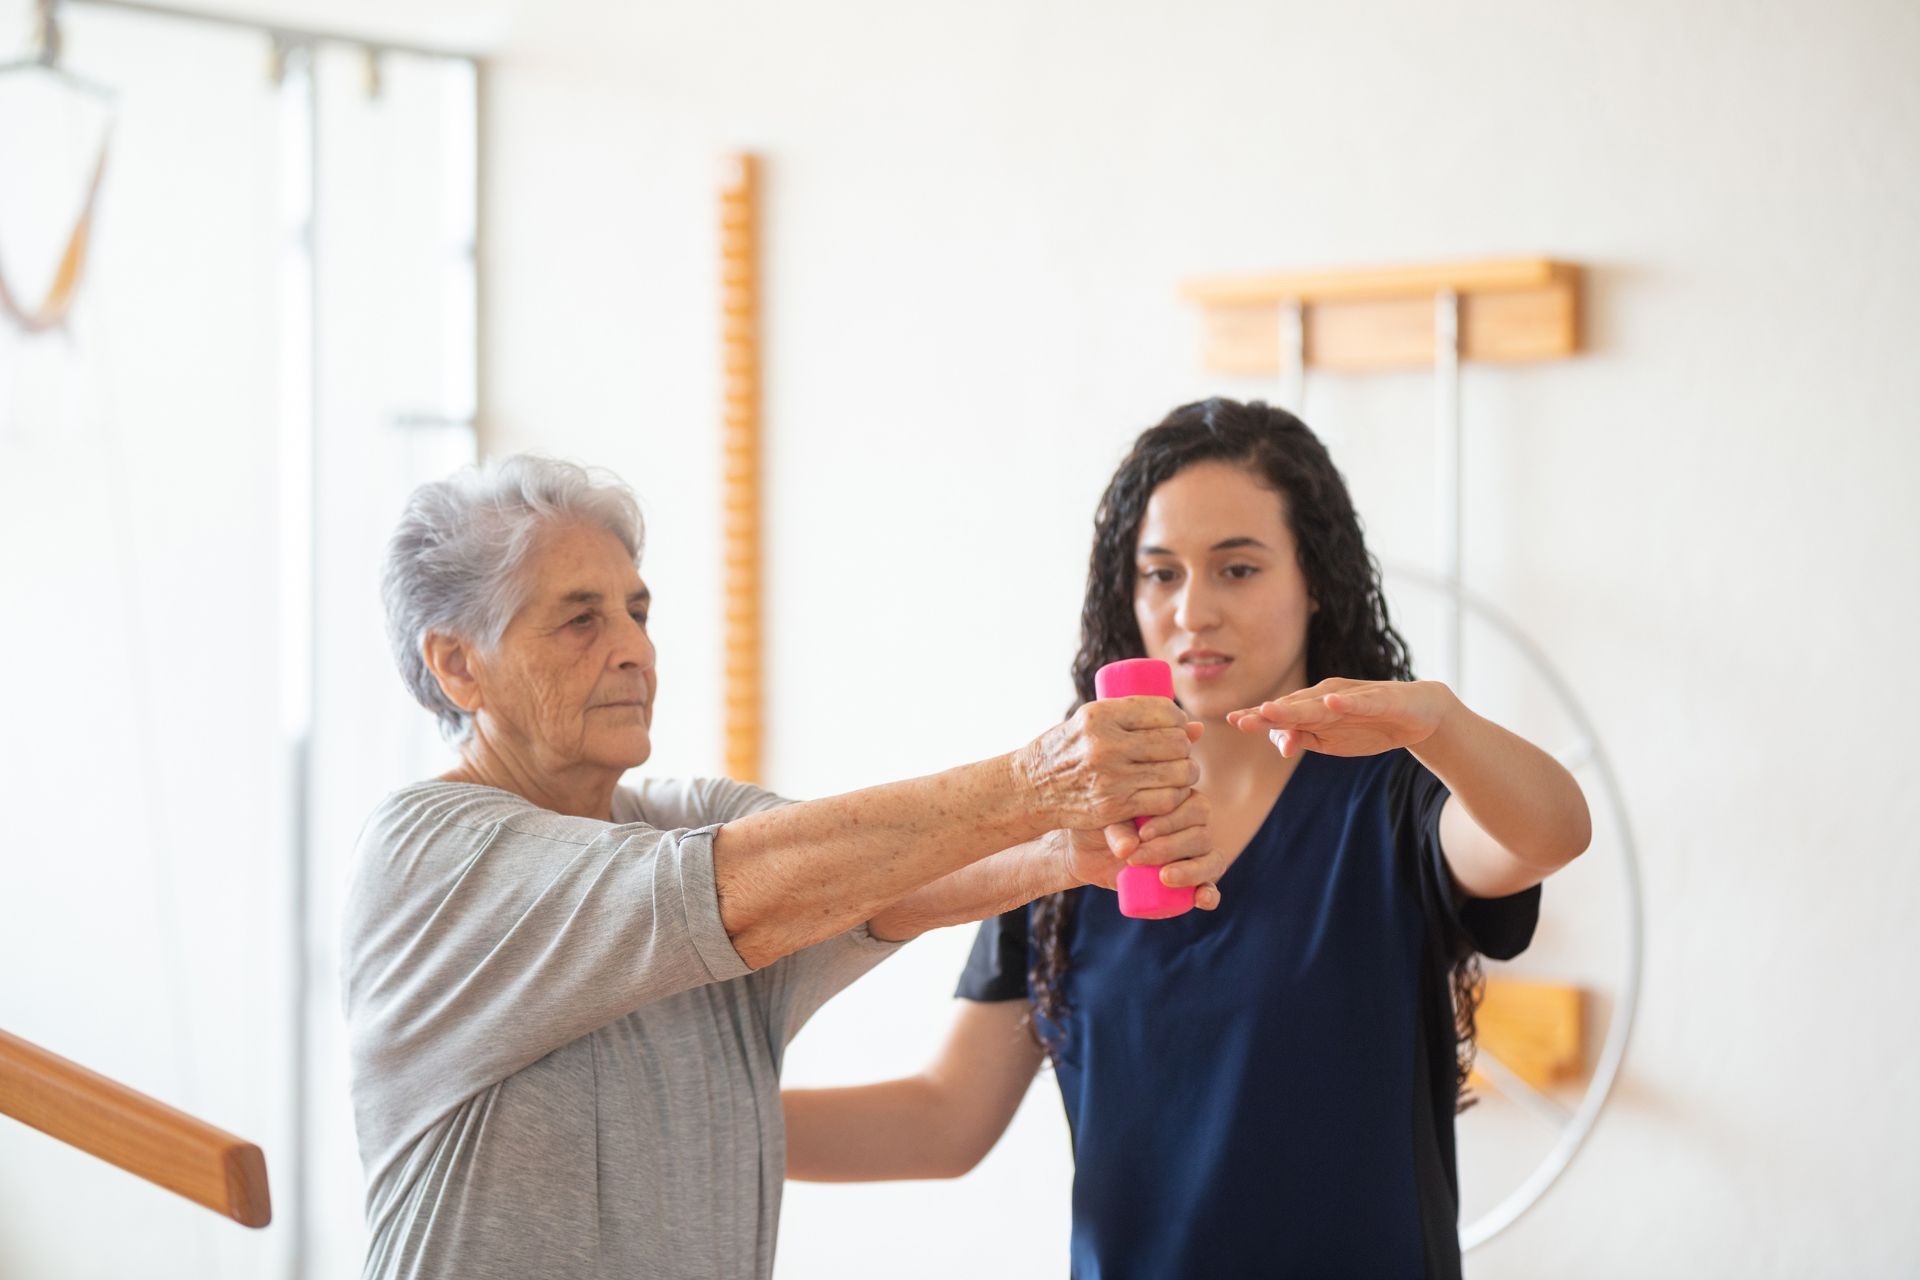 Is vestibular rehabilitation suitable for individuals of all ages, including children and older adults?